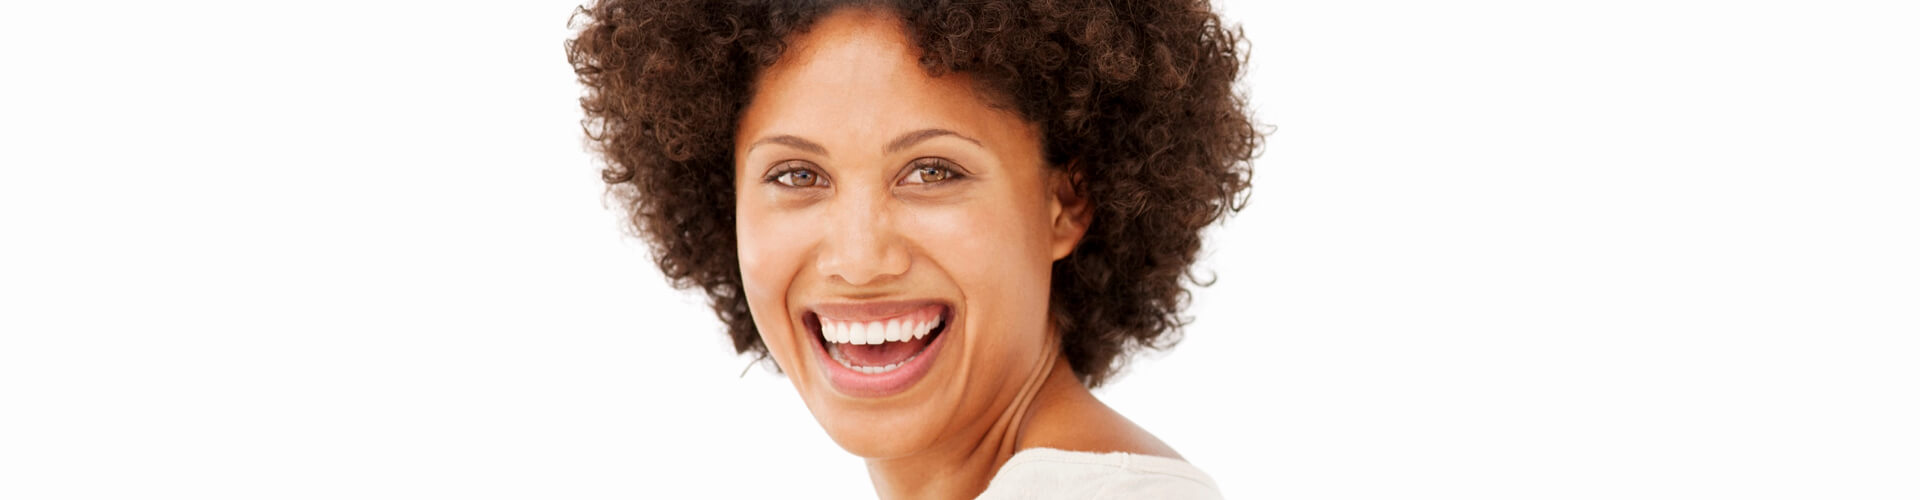 Are You Ready for a Smile Makeover?